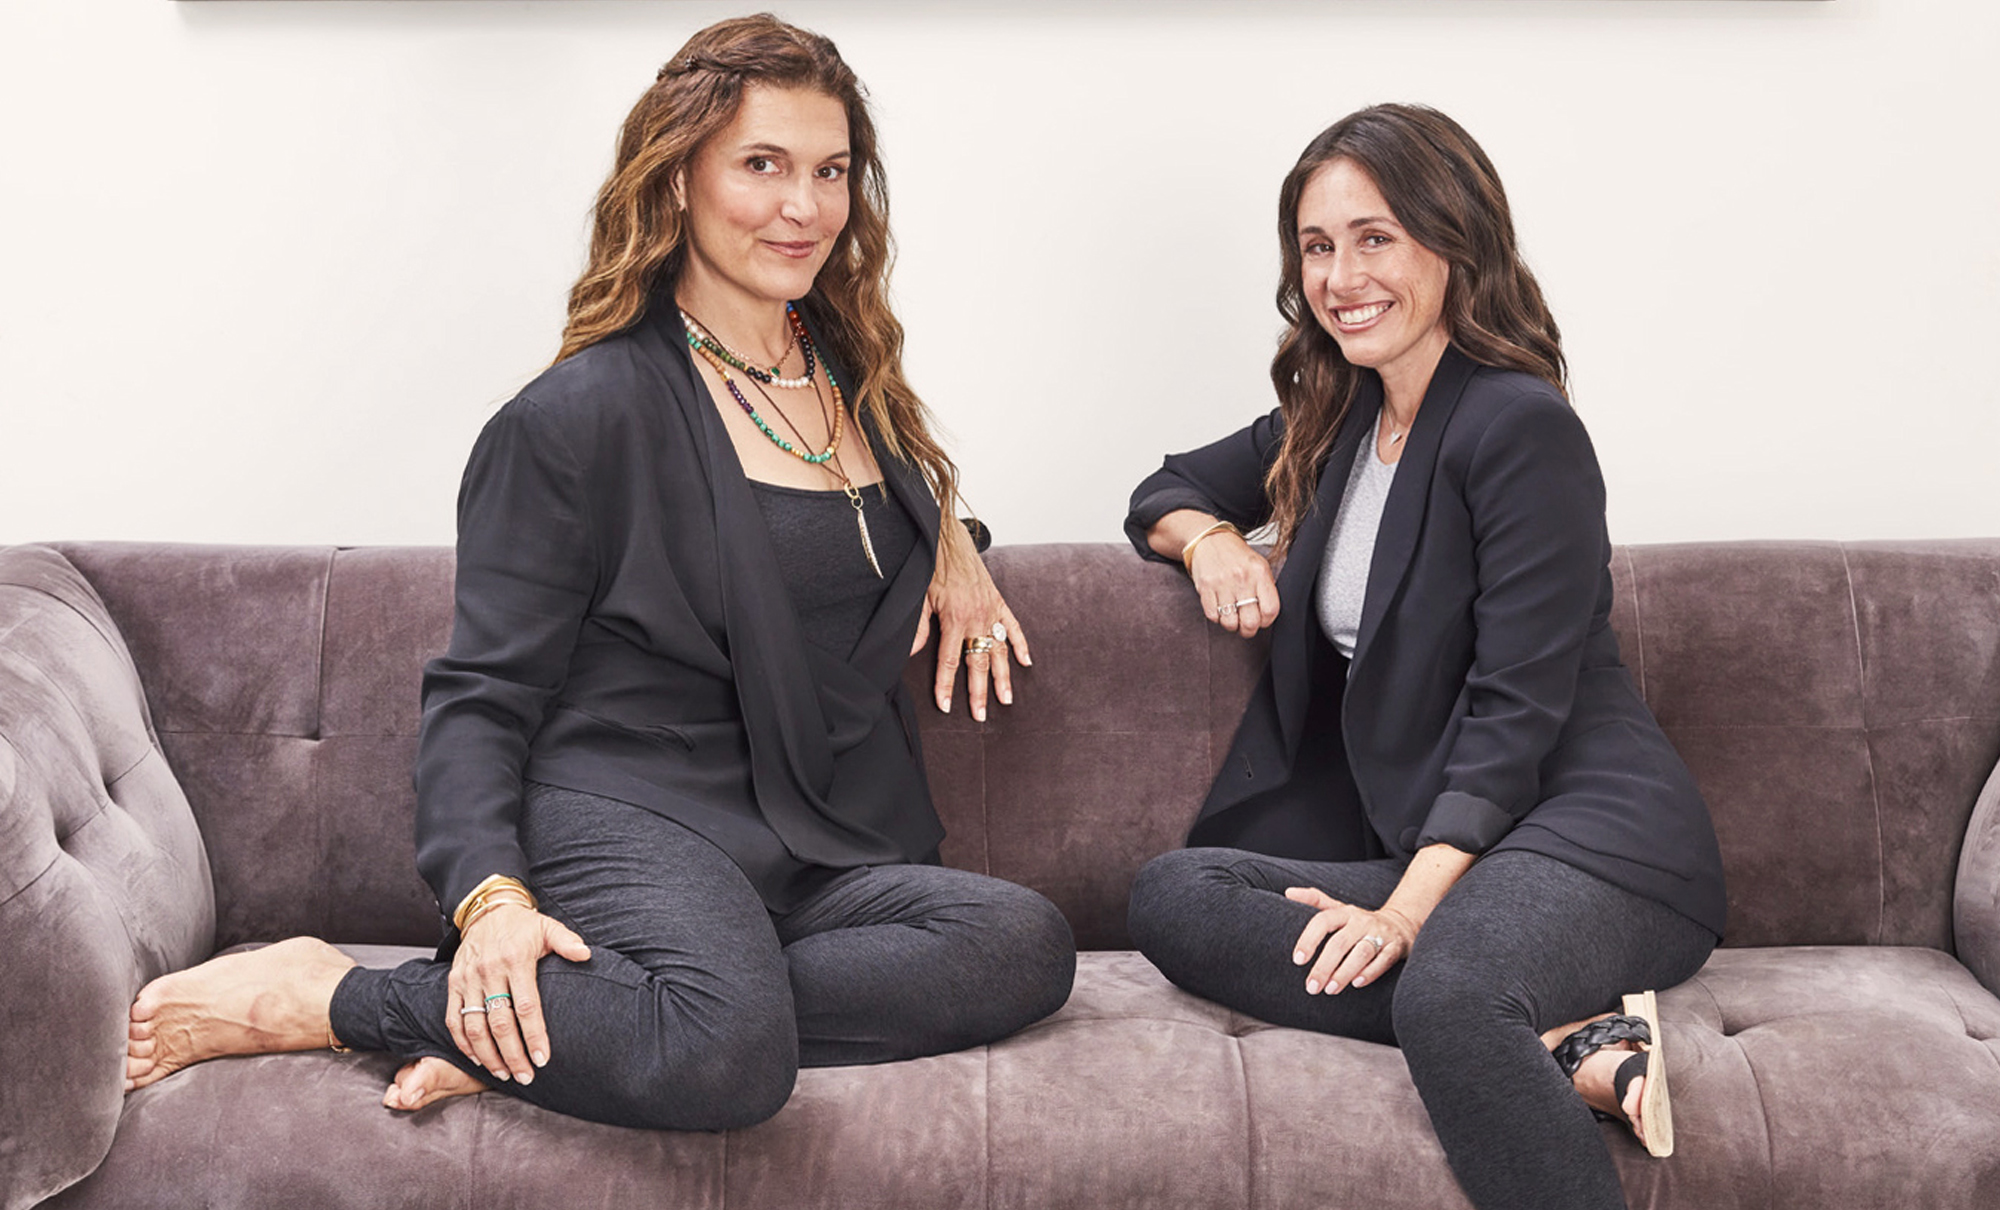 A Conversation With Beyond Yoga's Co-Founders - Levi Strauss & Co